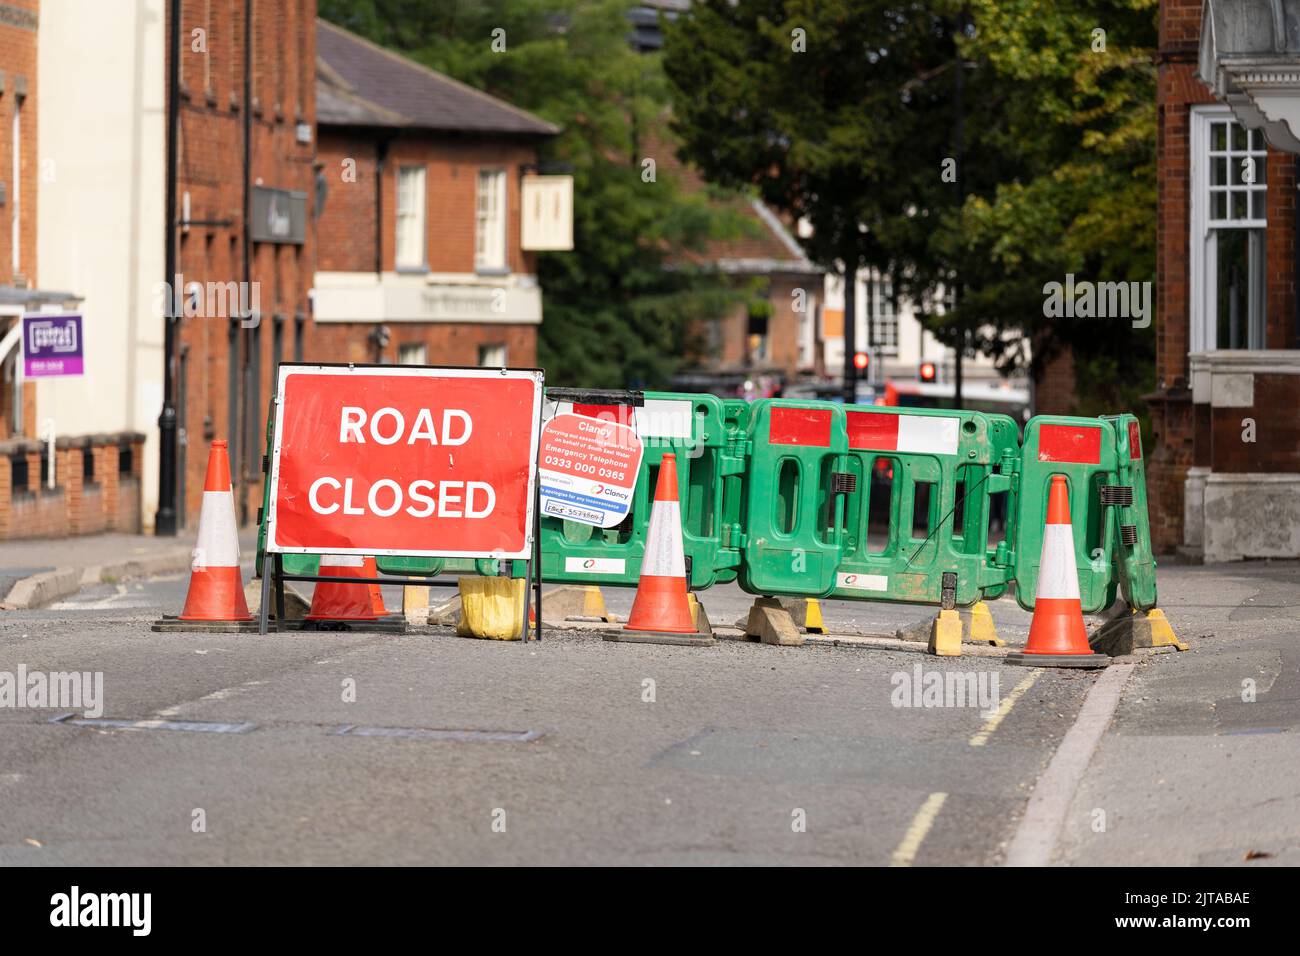 Road closed sign and traffic being diverted around Winchester Road, with road works for repairing a burst water main in the road. Basingstoke, UK Stock Photo